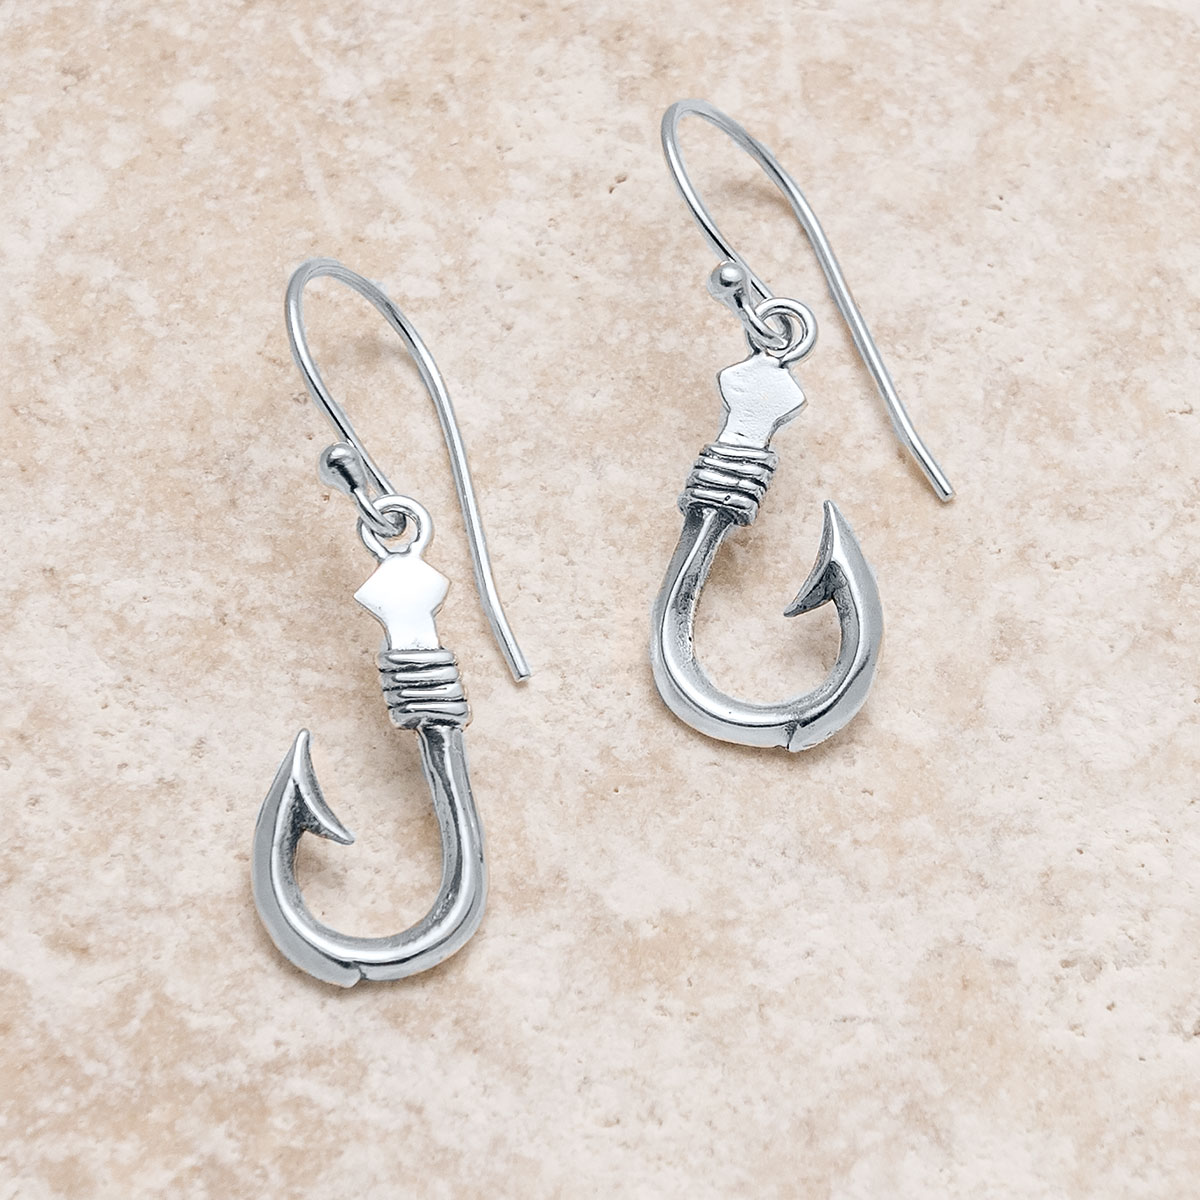 Puzzled Silver Ship Anchor Fish Hook Earrings, 1.5 Inch